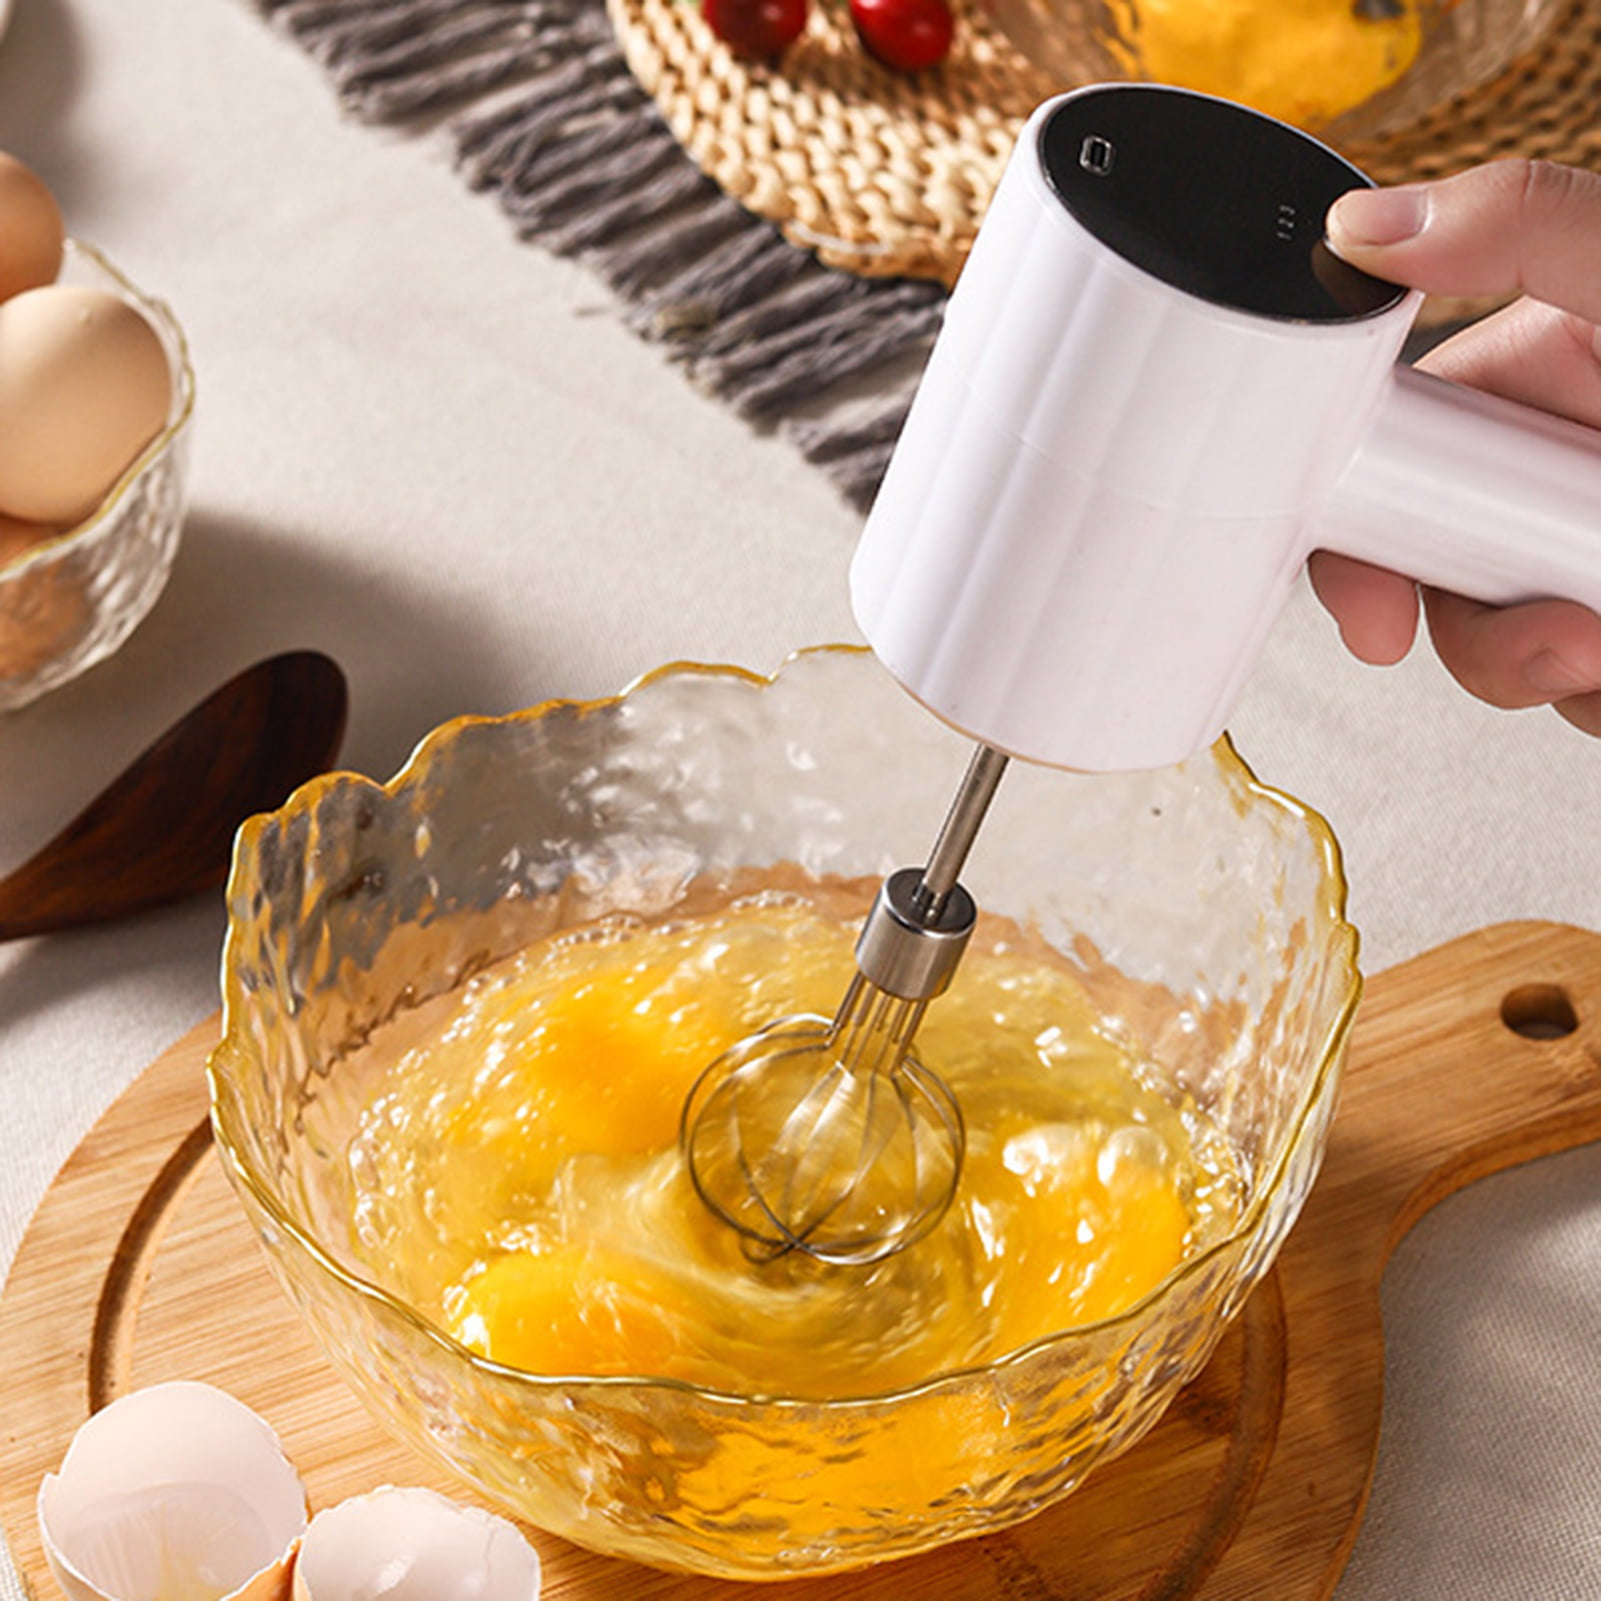 Electric Hand Mixer, Hand Blender USB Charging,Mixer Electric Handheld  Suitable for Whipping Egg Whites/Cake Batter/Cream,Egg Beater and Cream